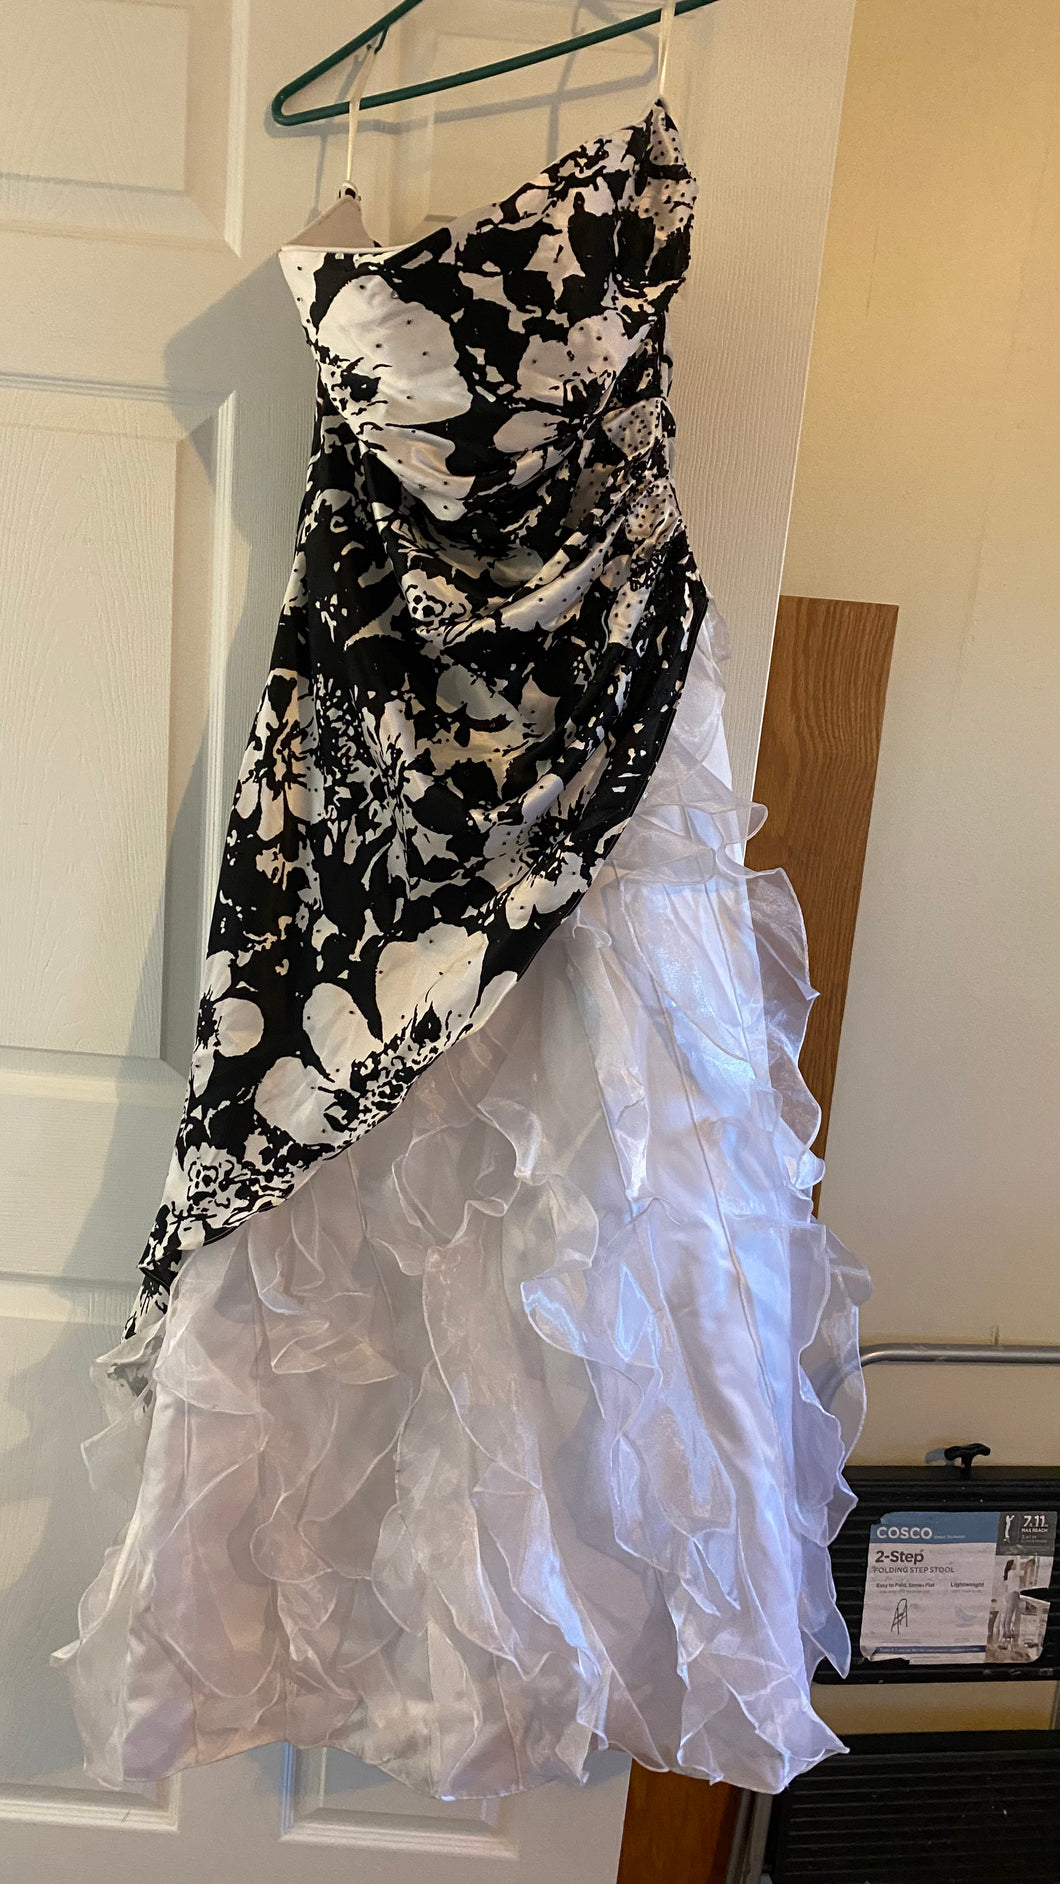 SHAR200-Y Black White Ball Gown. Size 11/12